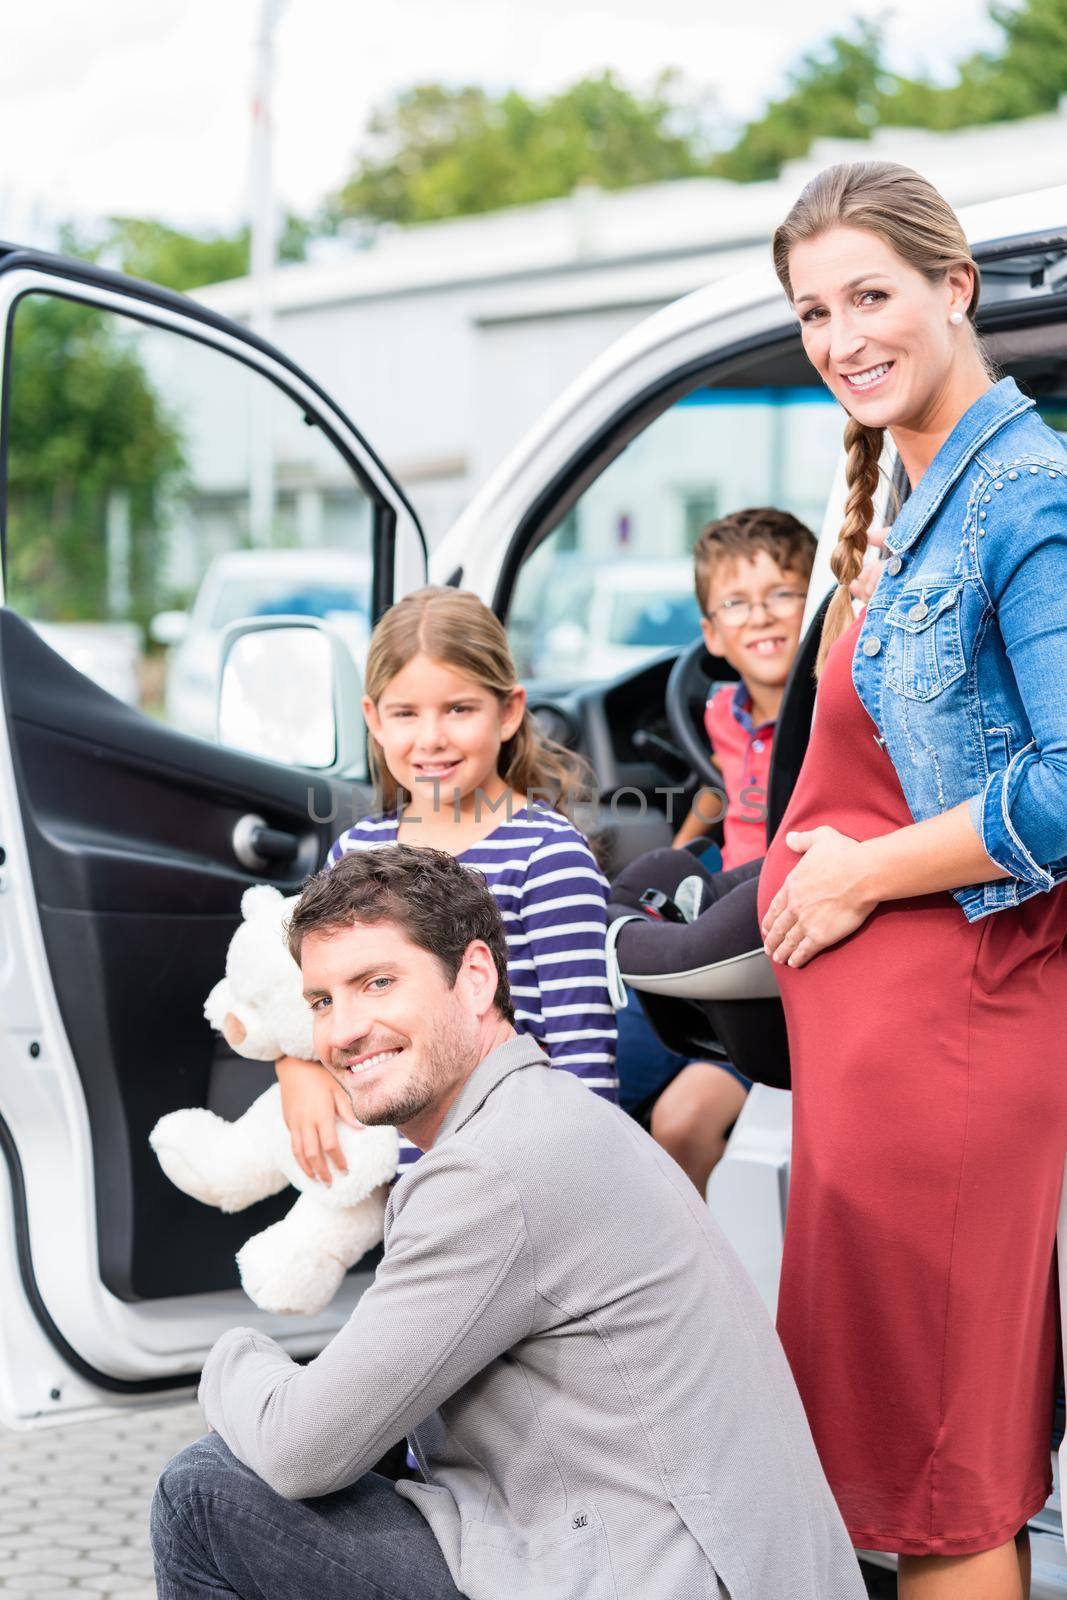 Family buying car, mother, father and child at dealership by Kzenon